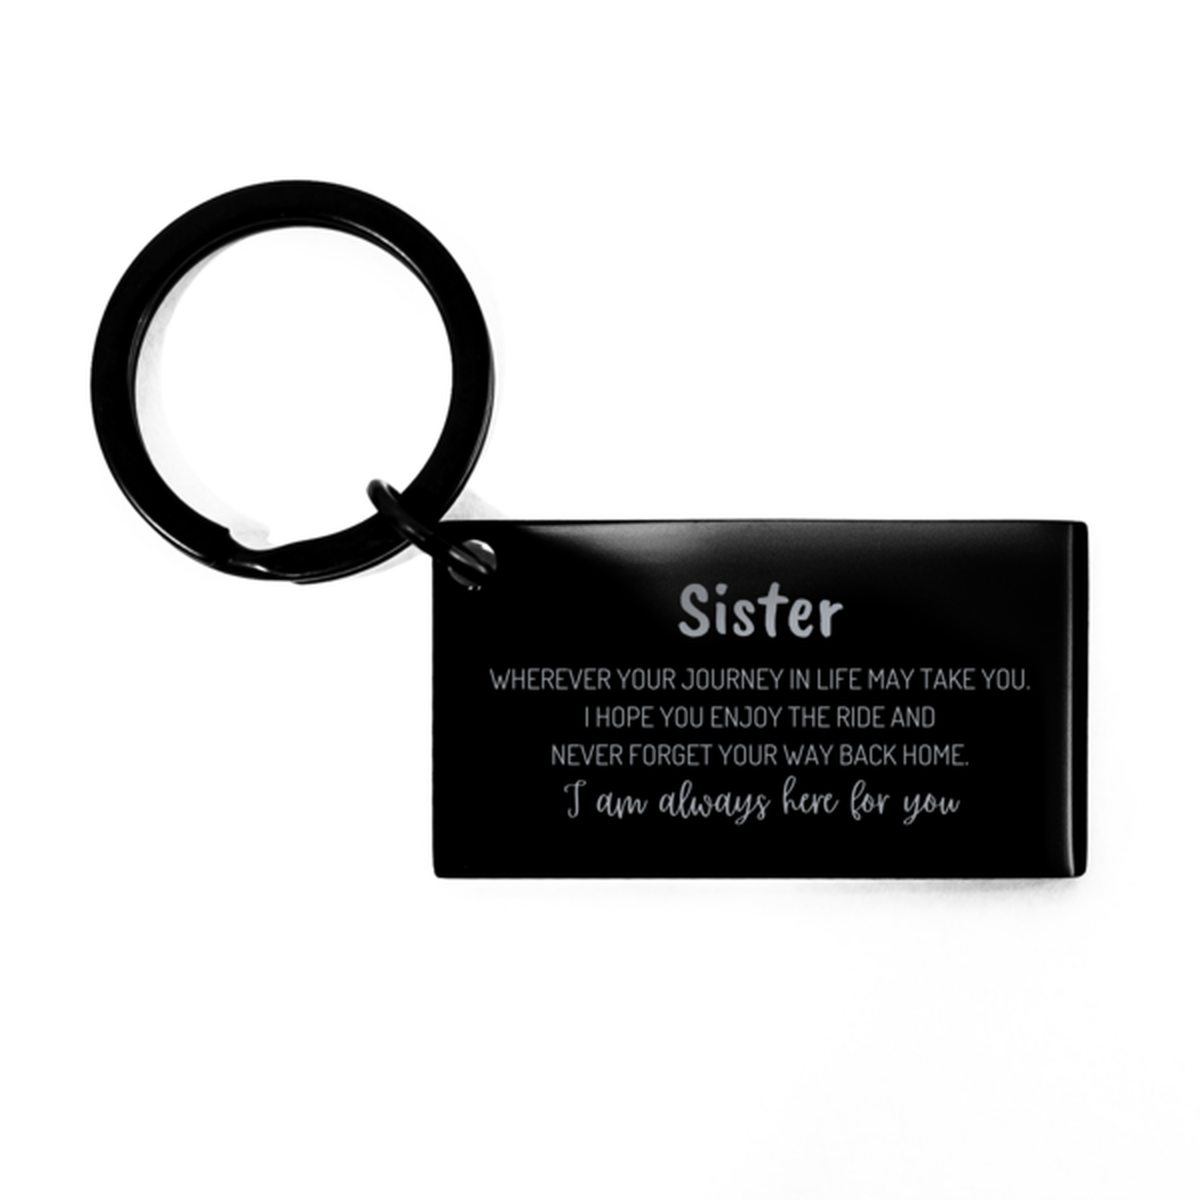 Sister wherever your journey in life may take you, I am always here for you Sister Keychain, Awesome Christmas Gifts For Sister, Sister Birthday Gifts for Men Women Family Loved One